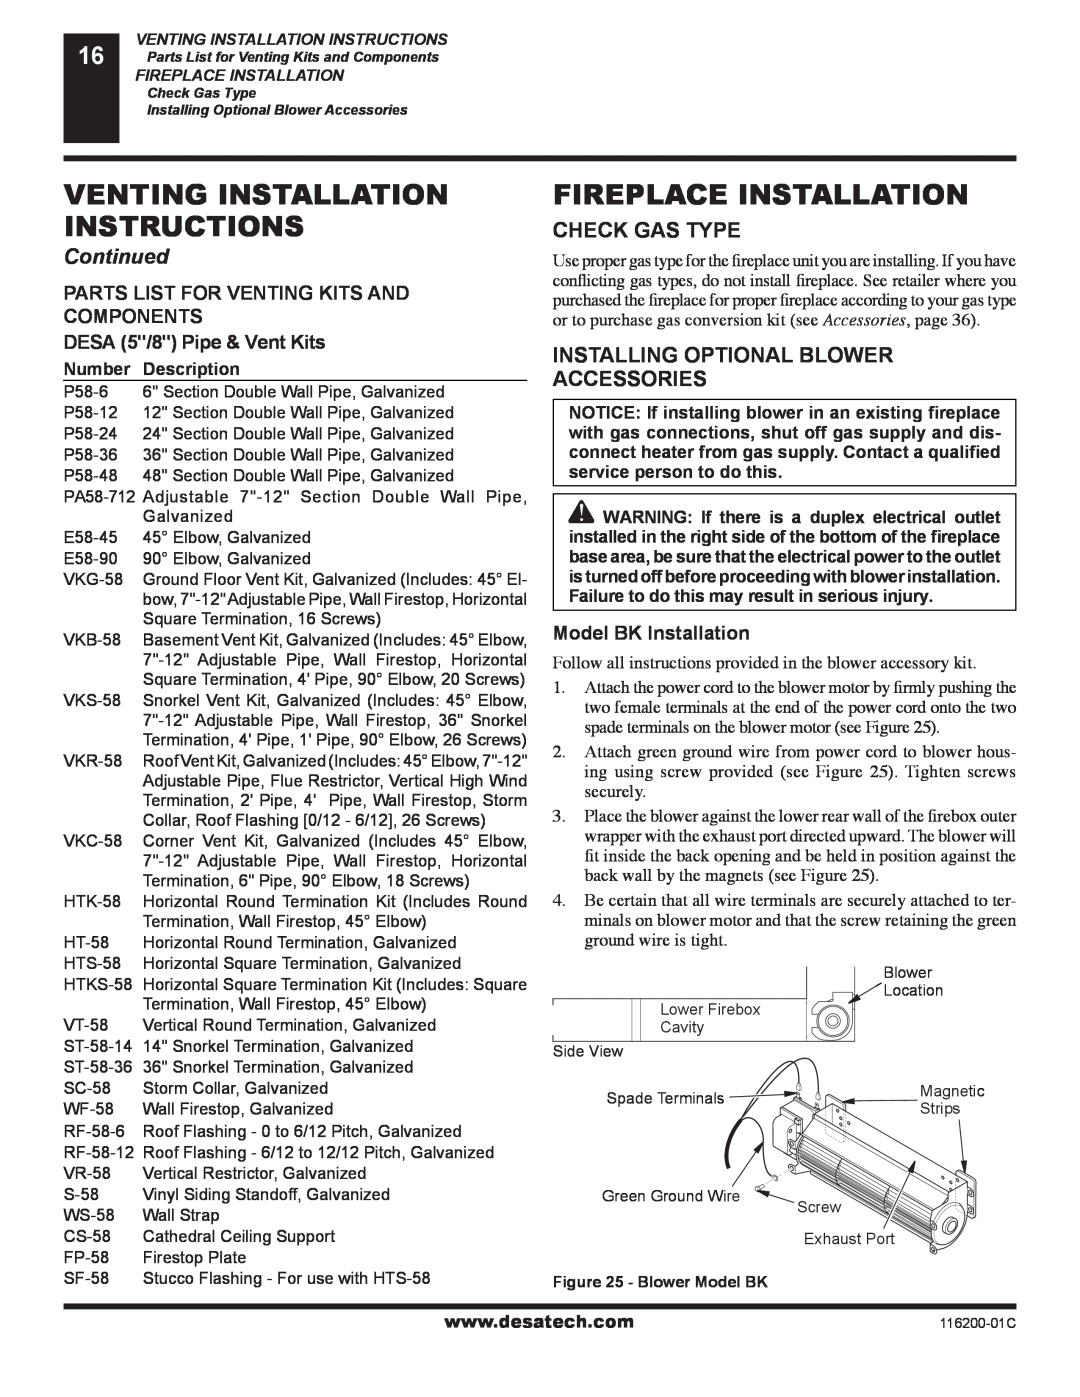 Desa (V)VC36P Venting Installation, Instructions, Fireplace Installation, Check Gas Type, Parts List For Venting Kits And 